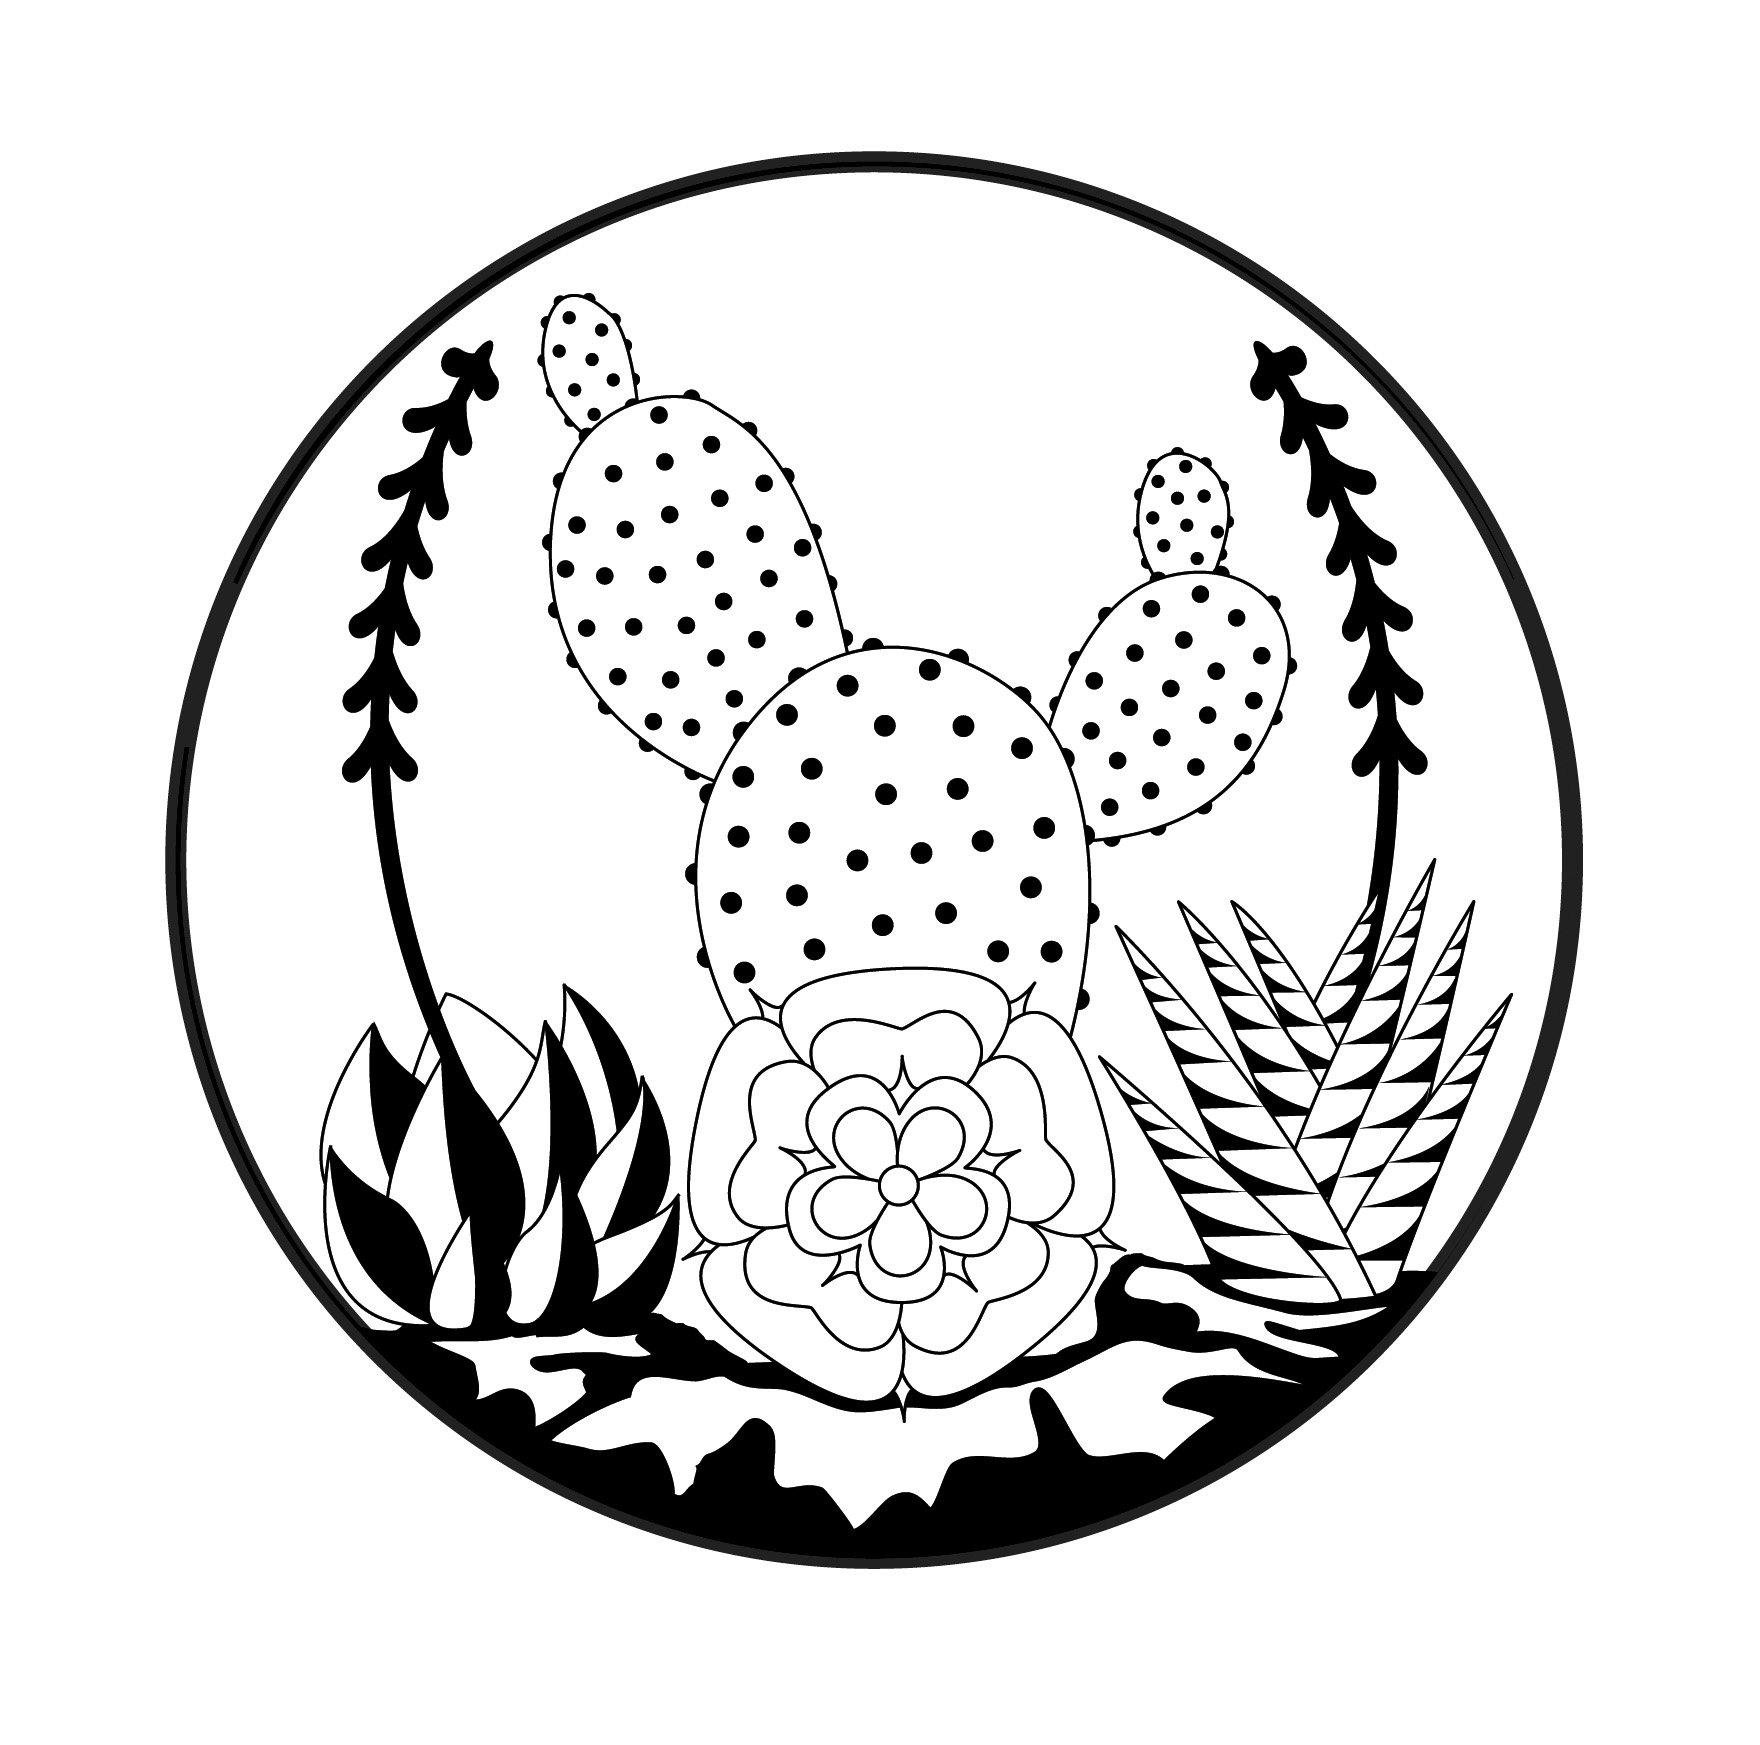 Cactus Flower Drawing - ClipArt Best